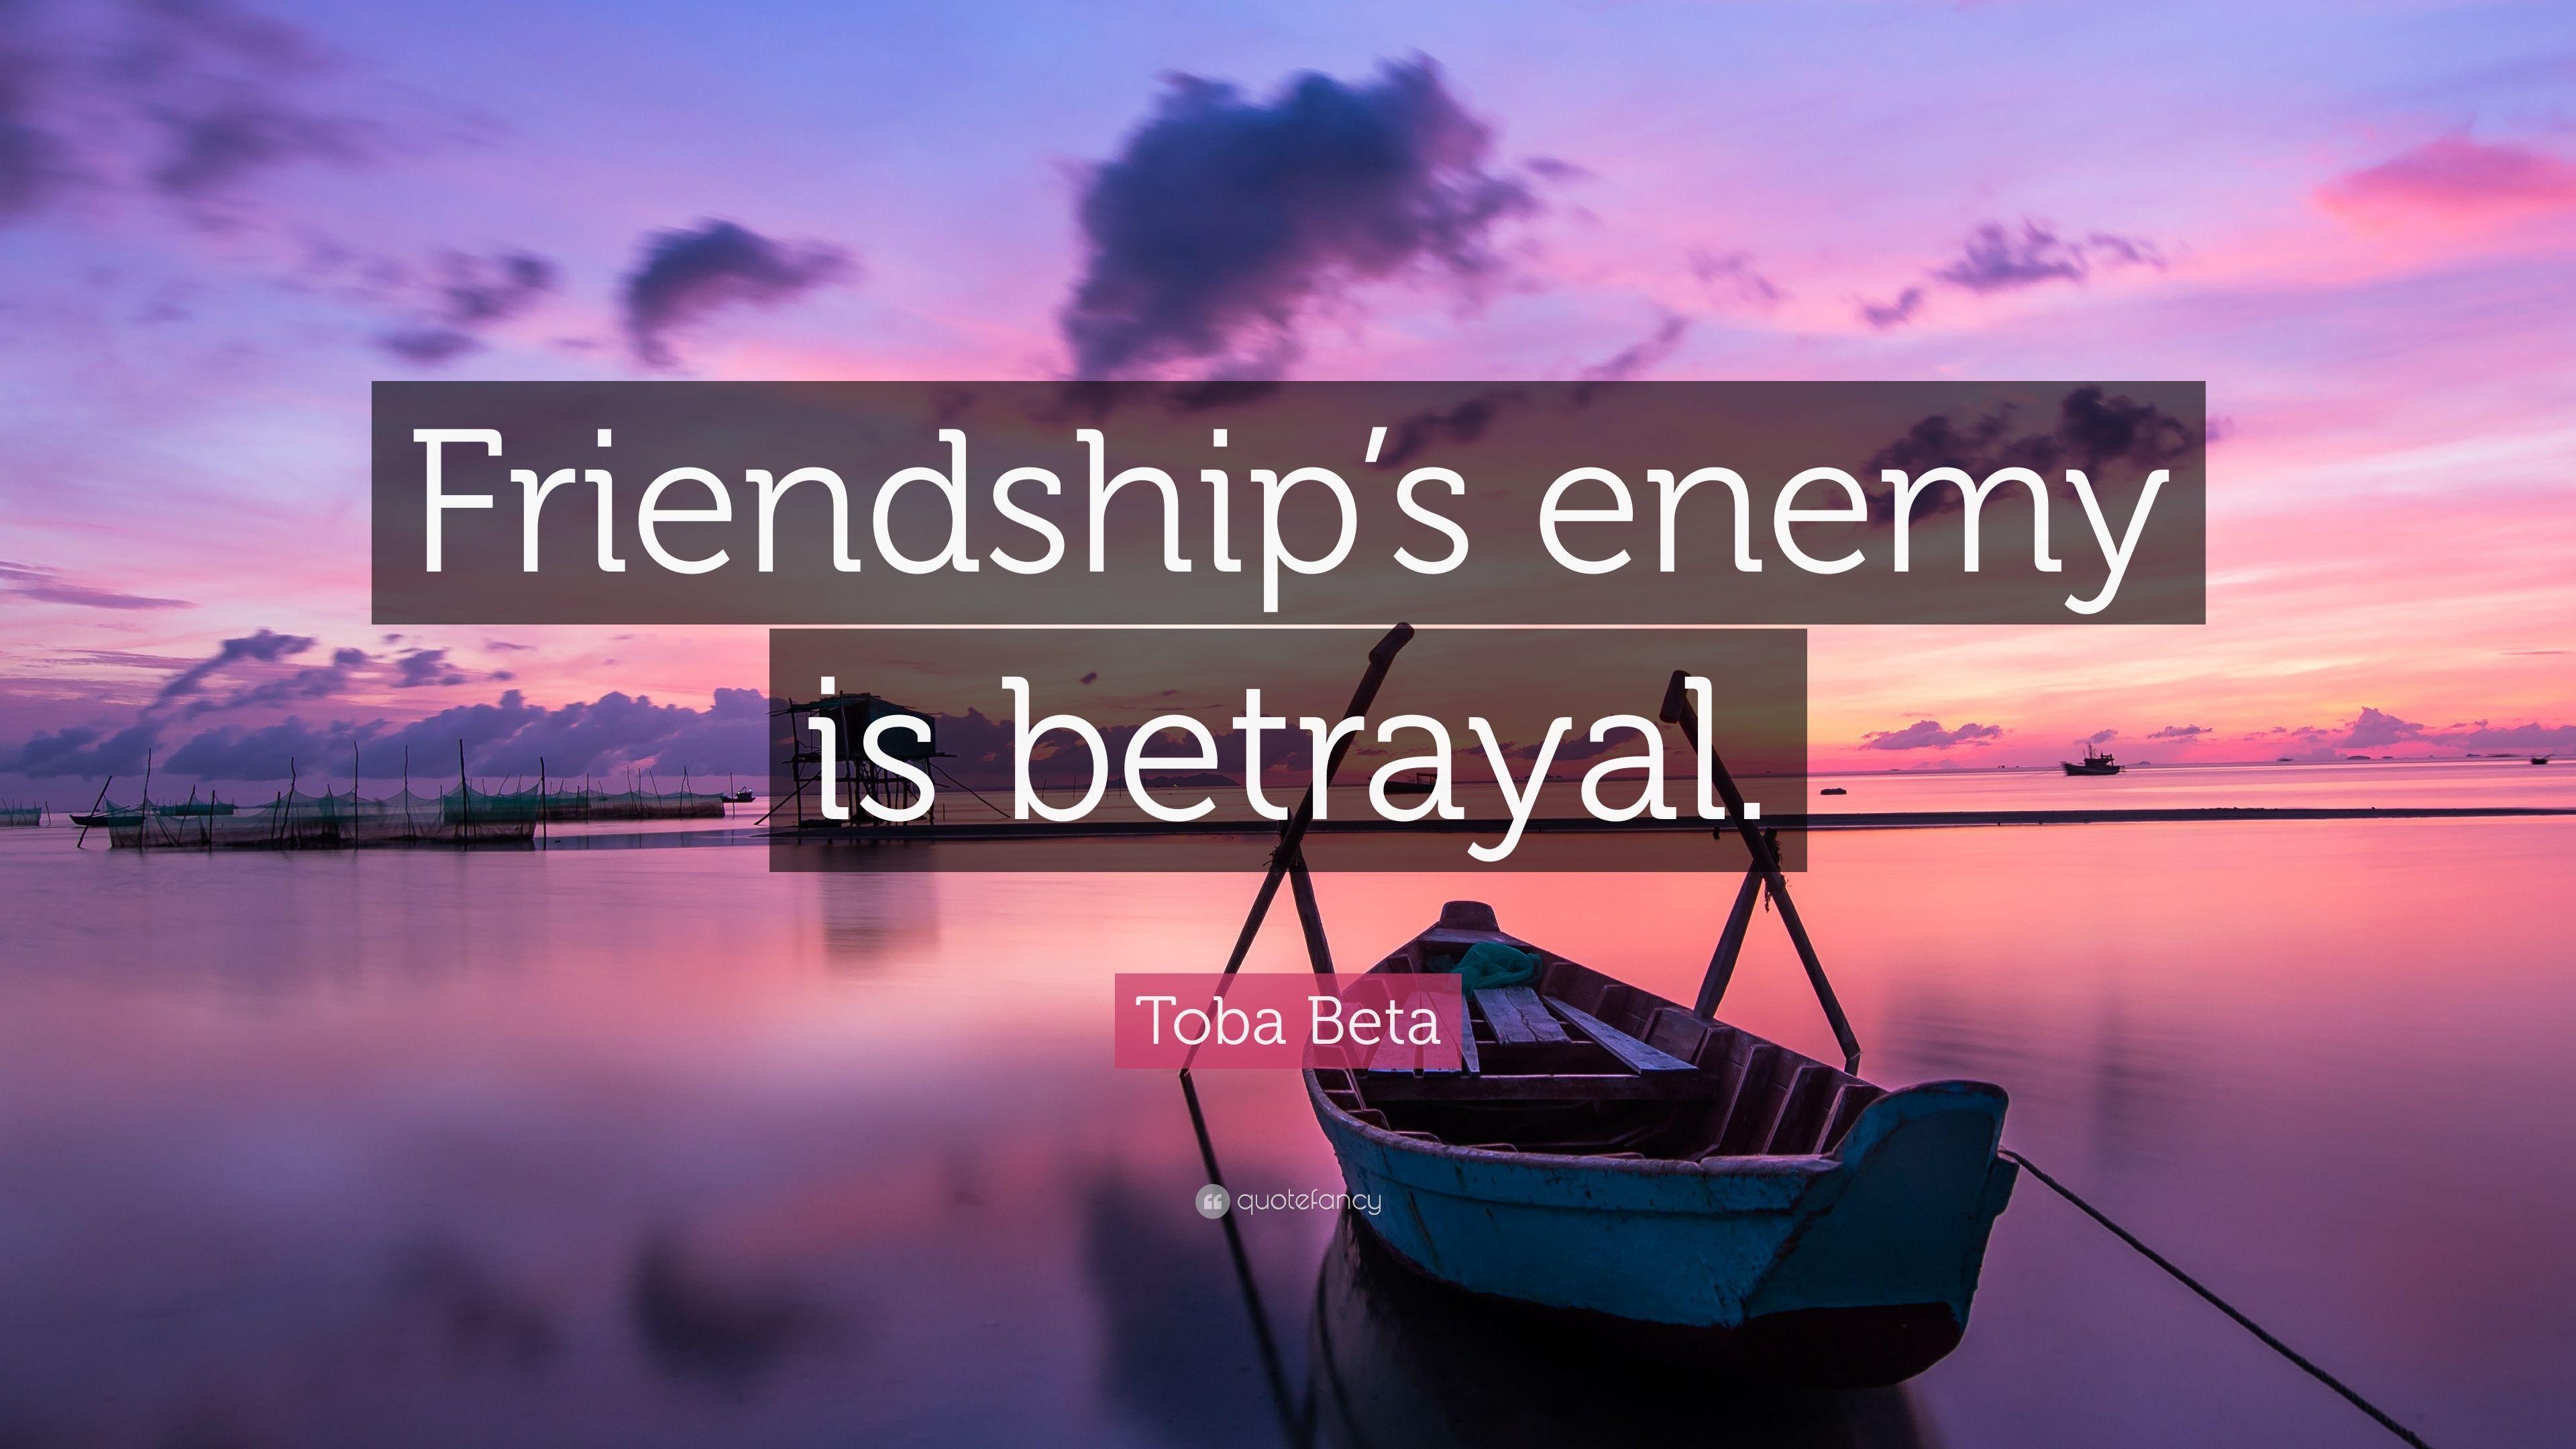 Toba Beta Quote: “Friendship's enemy is betrayal.” 10 wallpaper